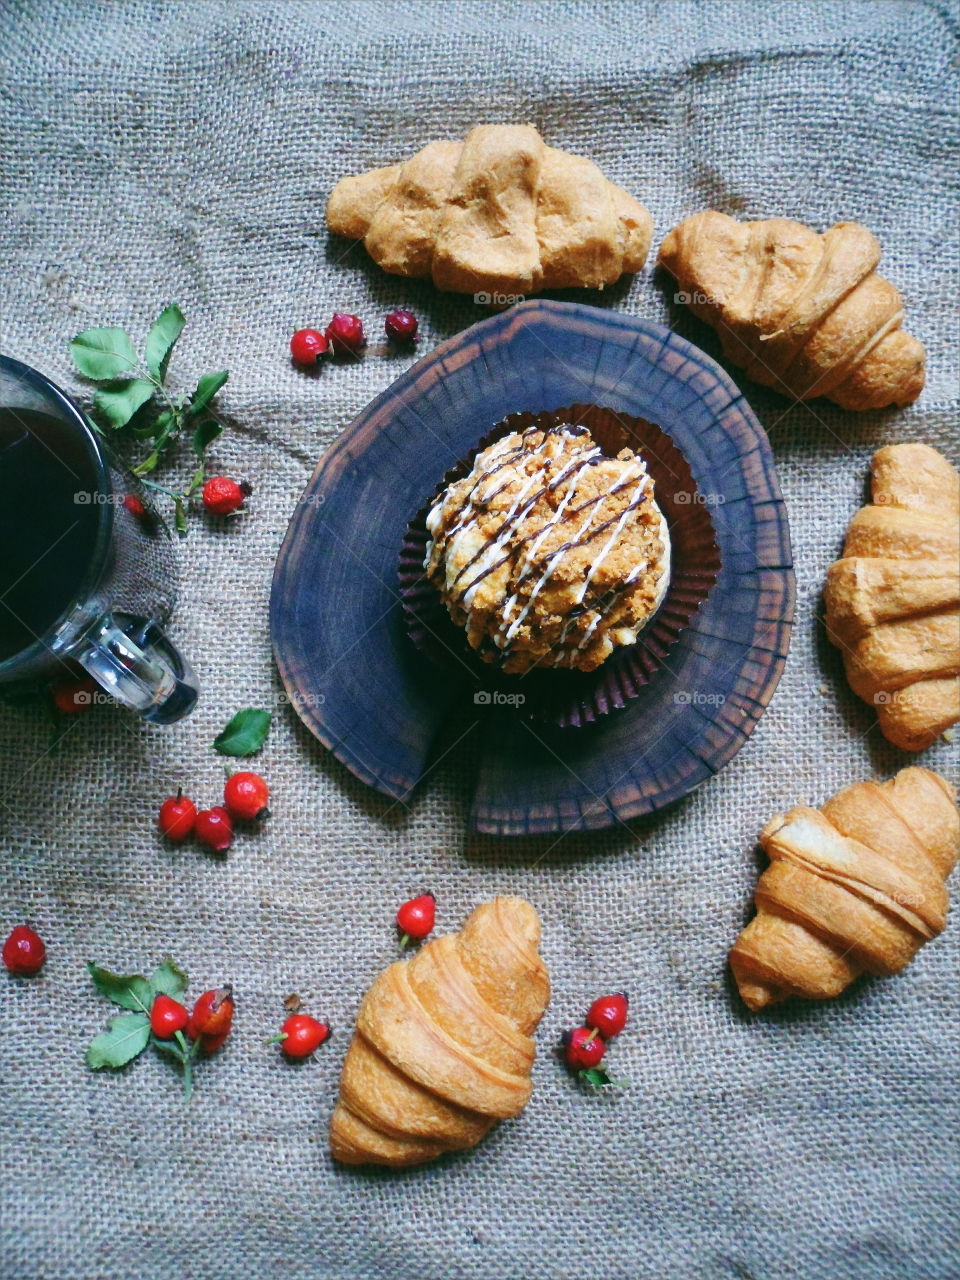 homemade croissants and cake